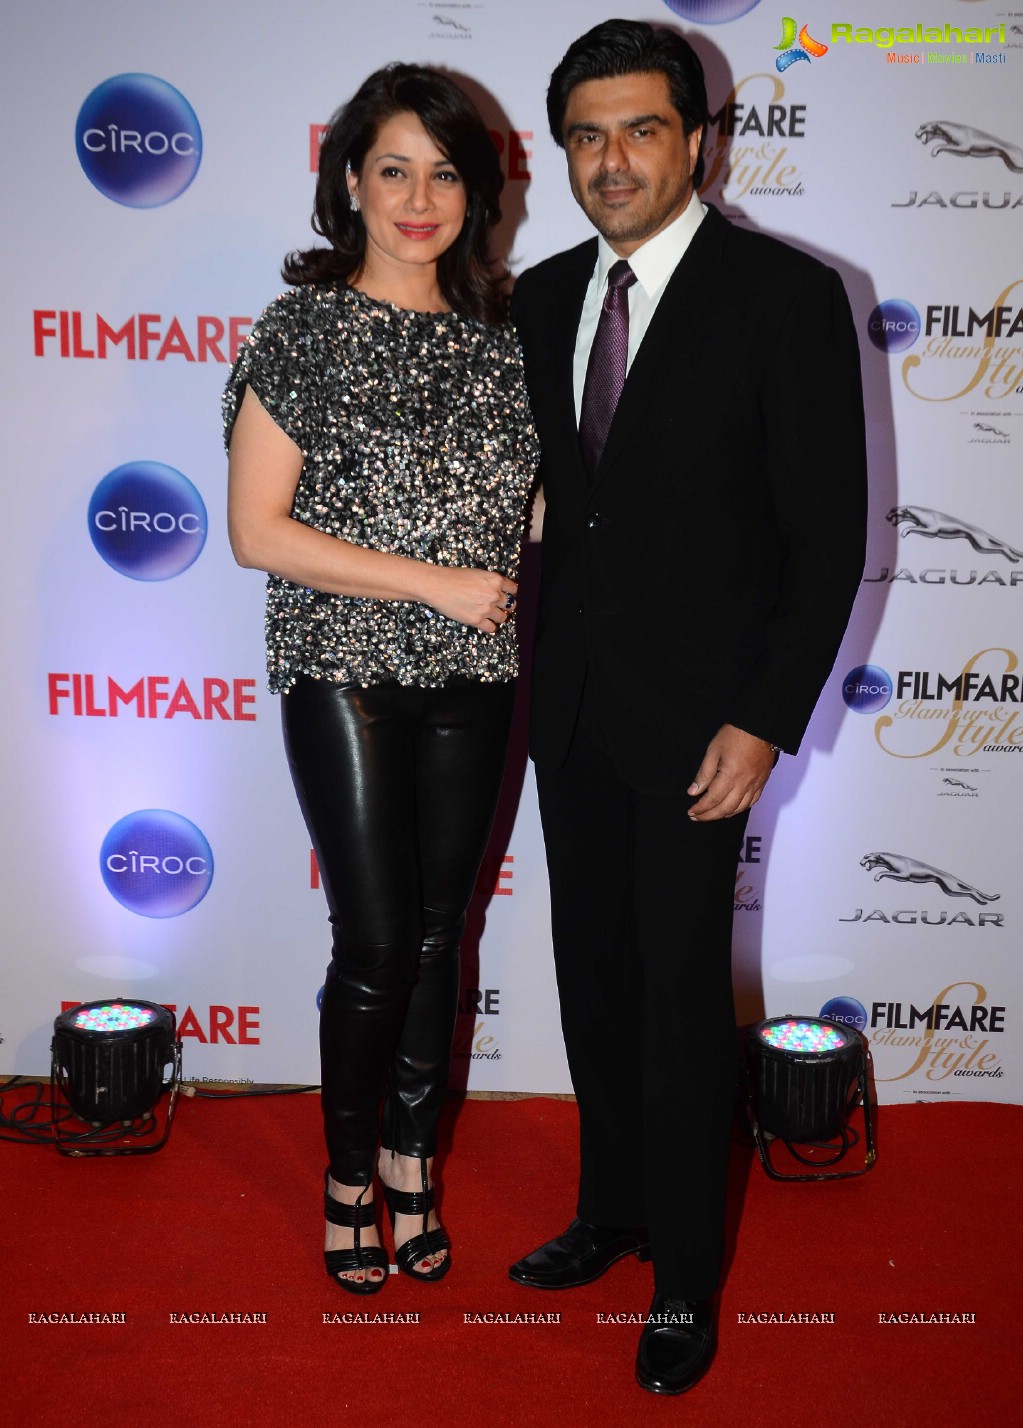 Ciroc Filmfare Glamour and Style Awards